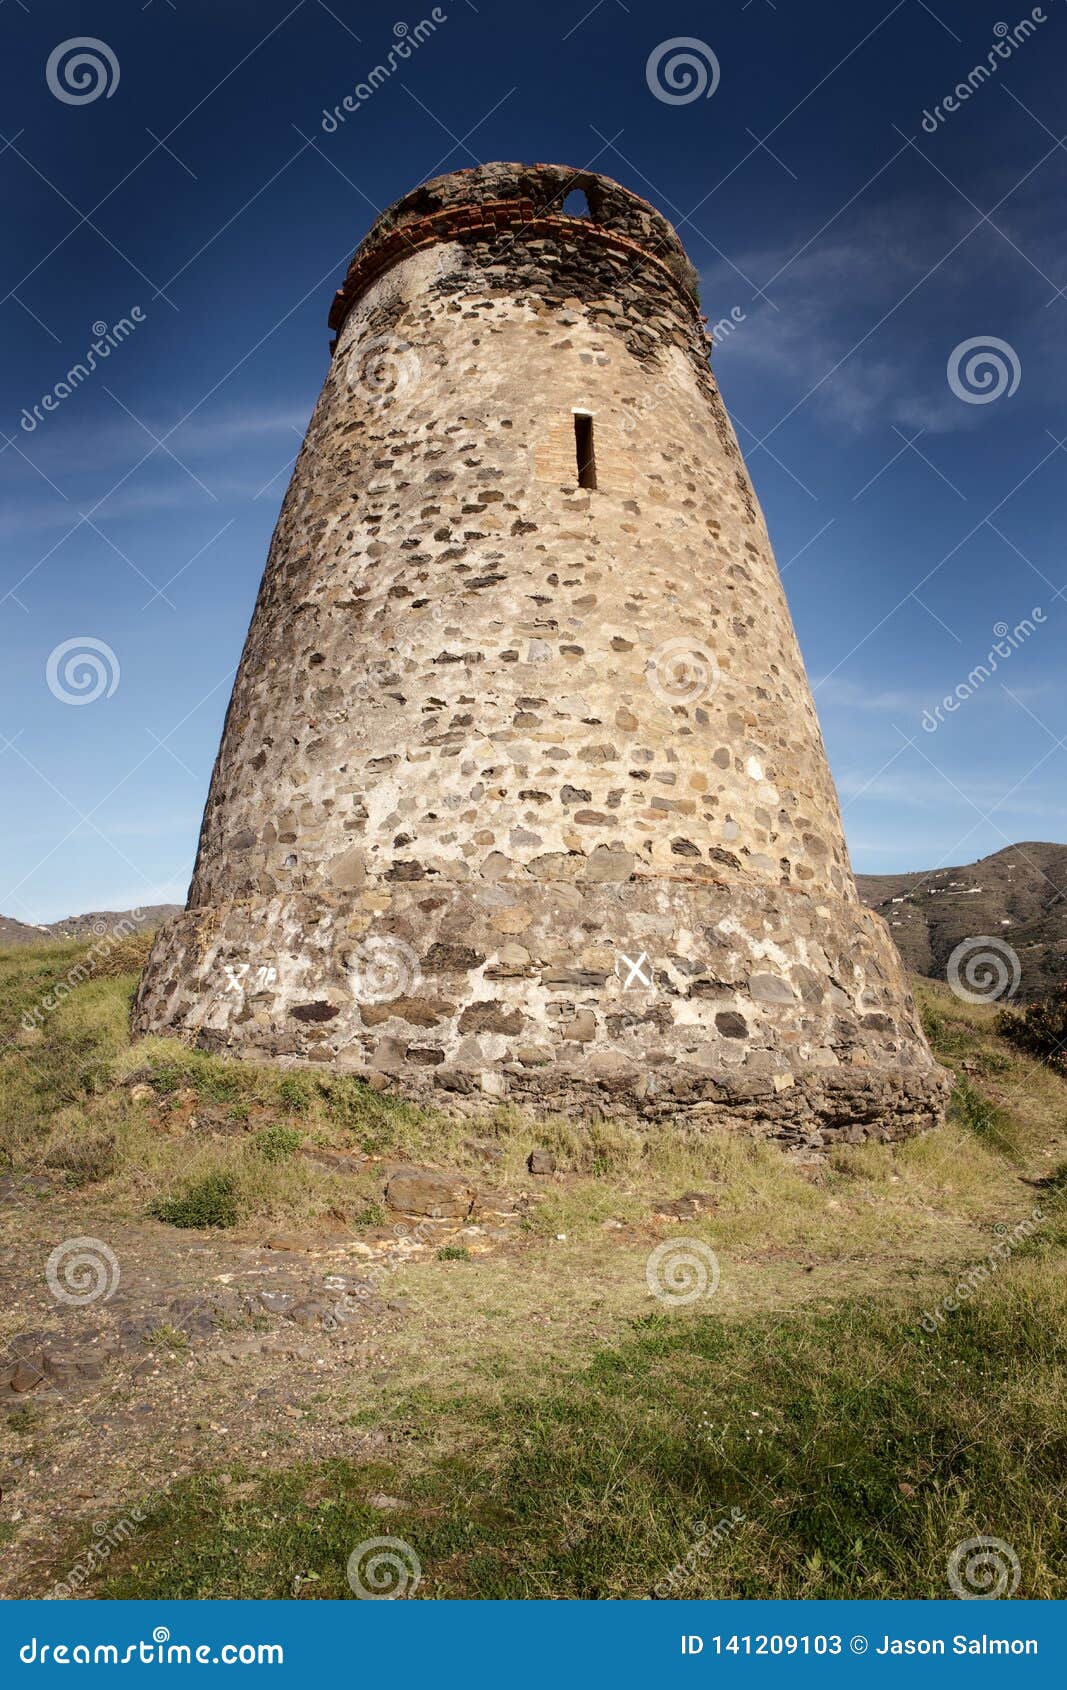 Old Stone Watchtower in Almunecar Spain Stock Image - Image of outdoor ...